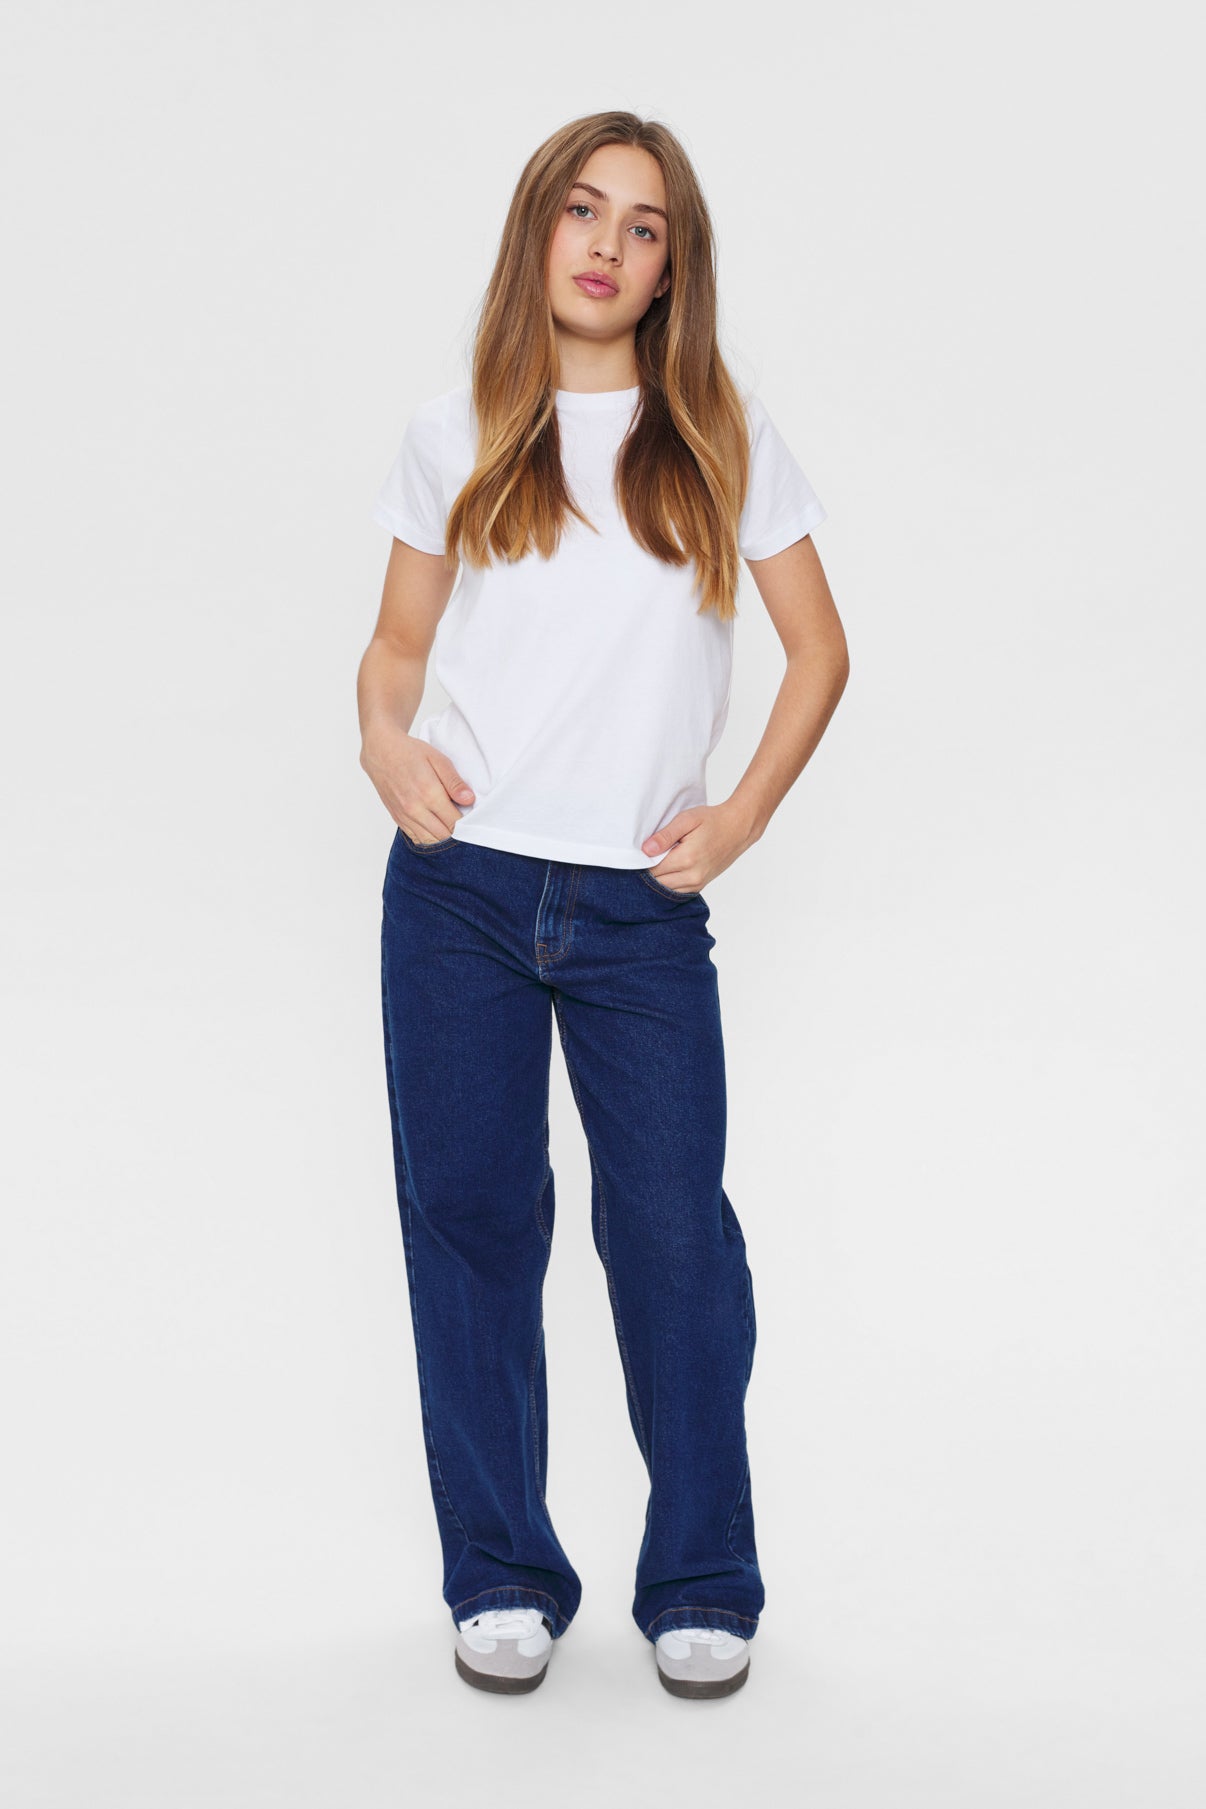 MONO GIRL Jeans MADDY 2508 WIDE